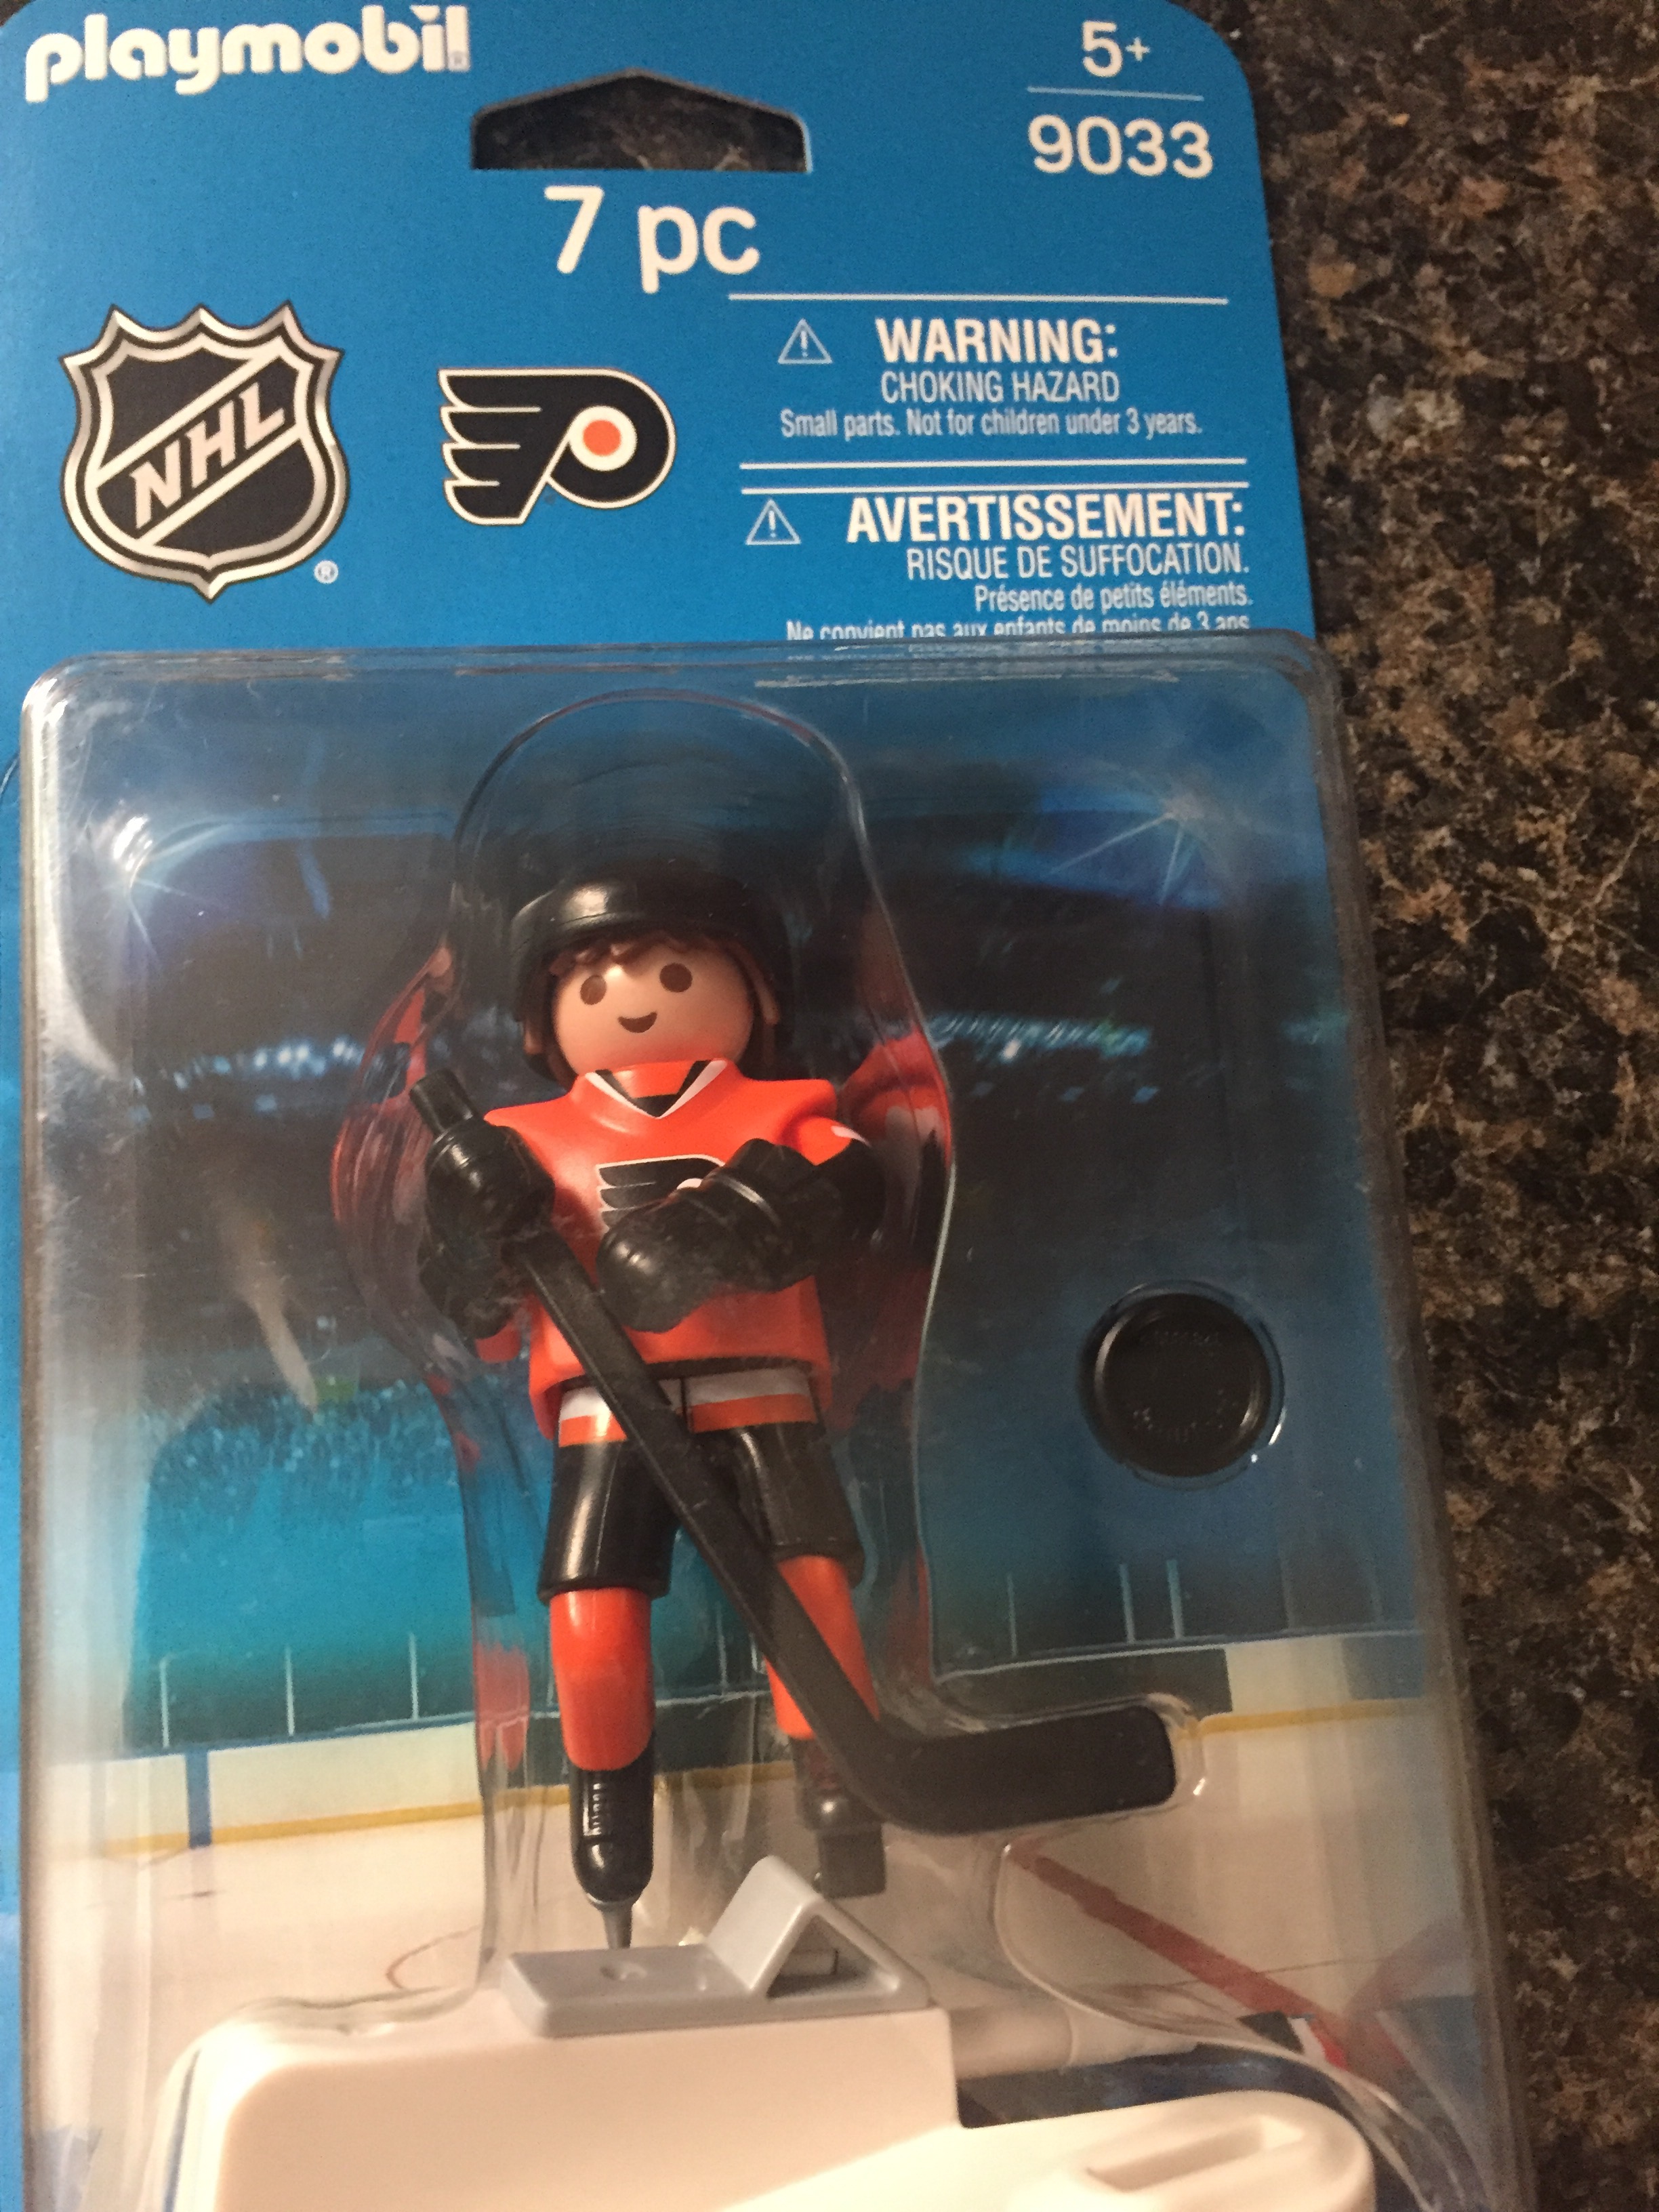 PLAYMOBIL has some pretty awesome Flyers & NHL figurines available